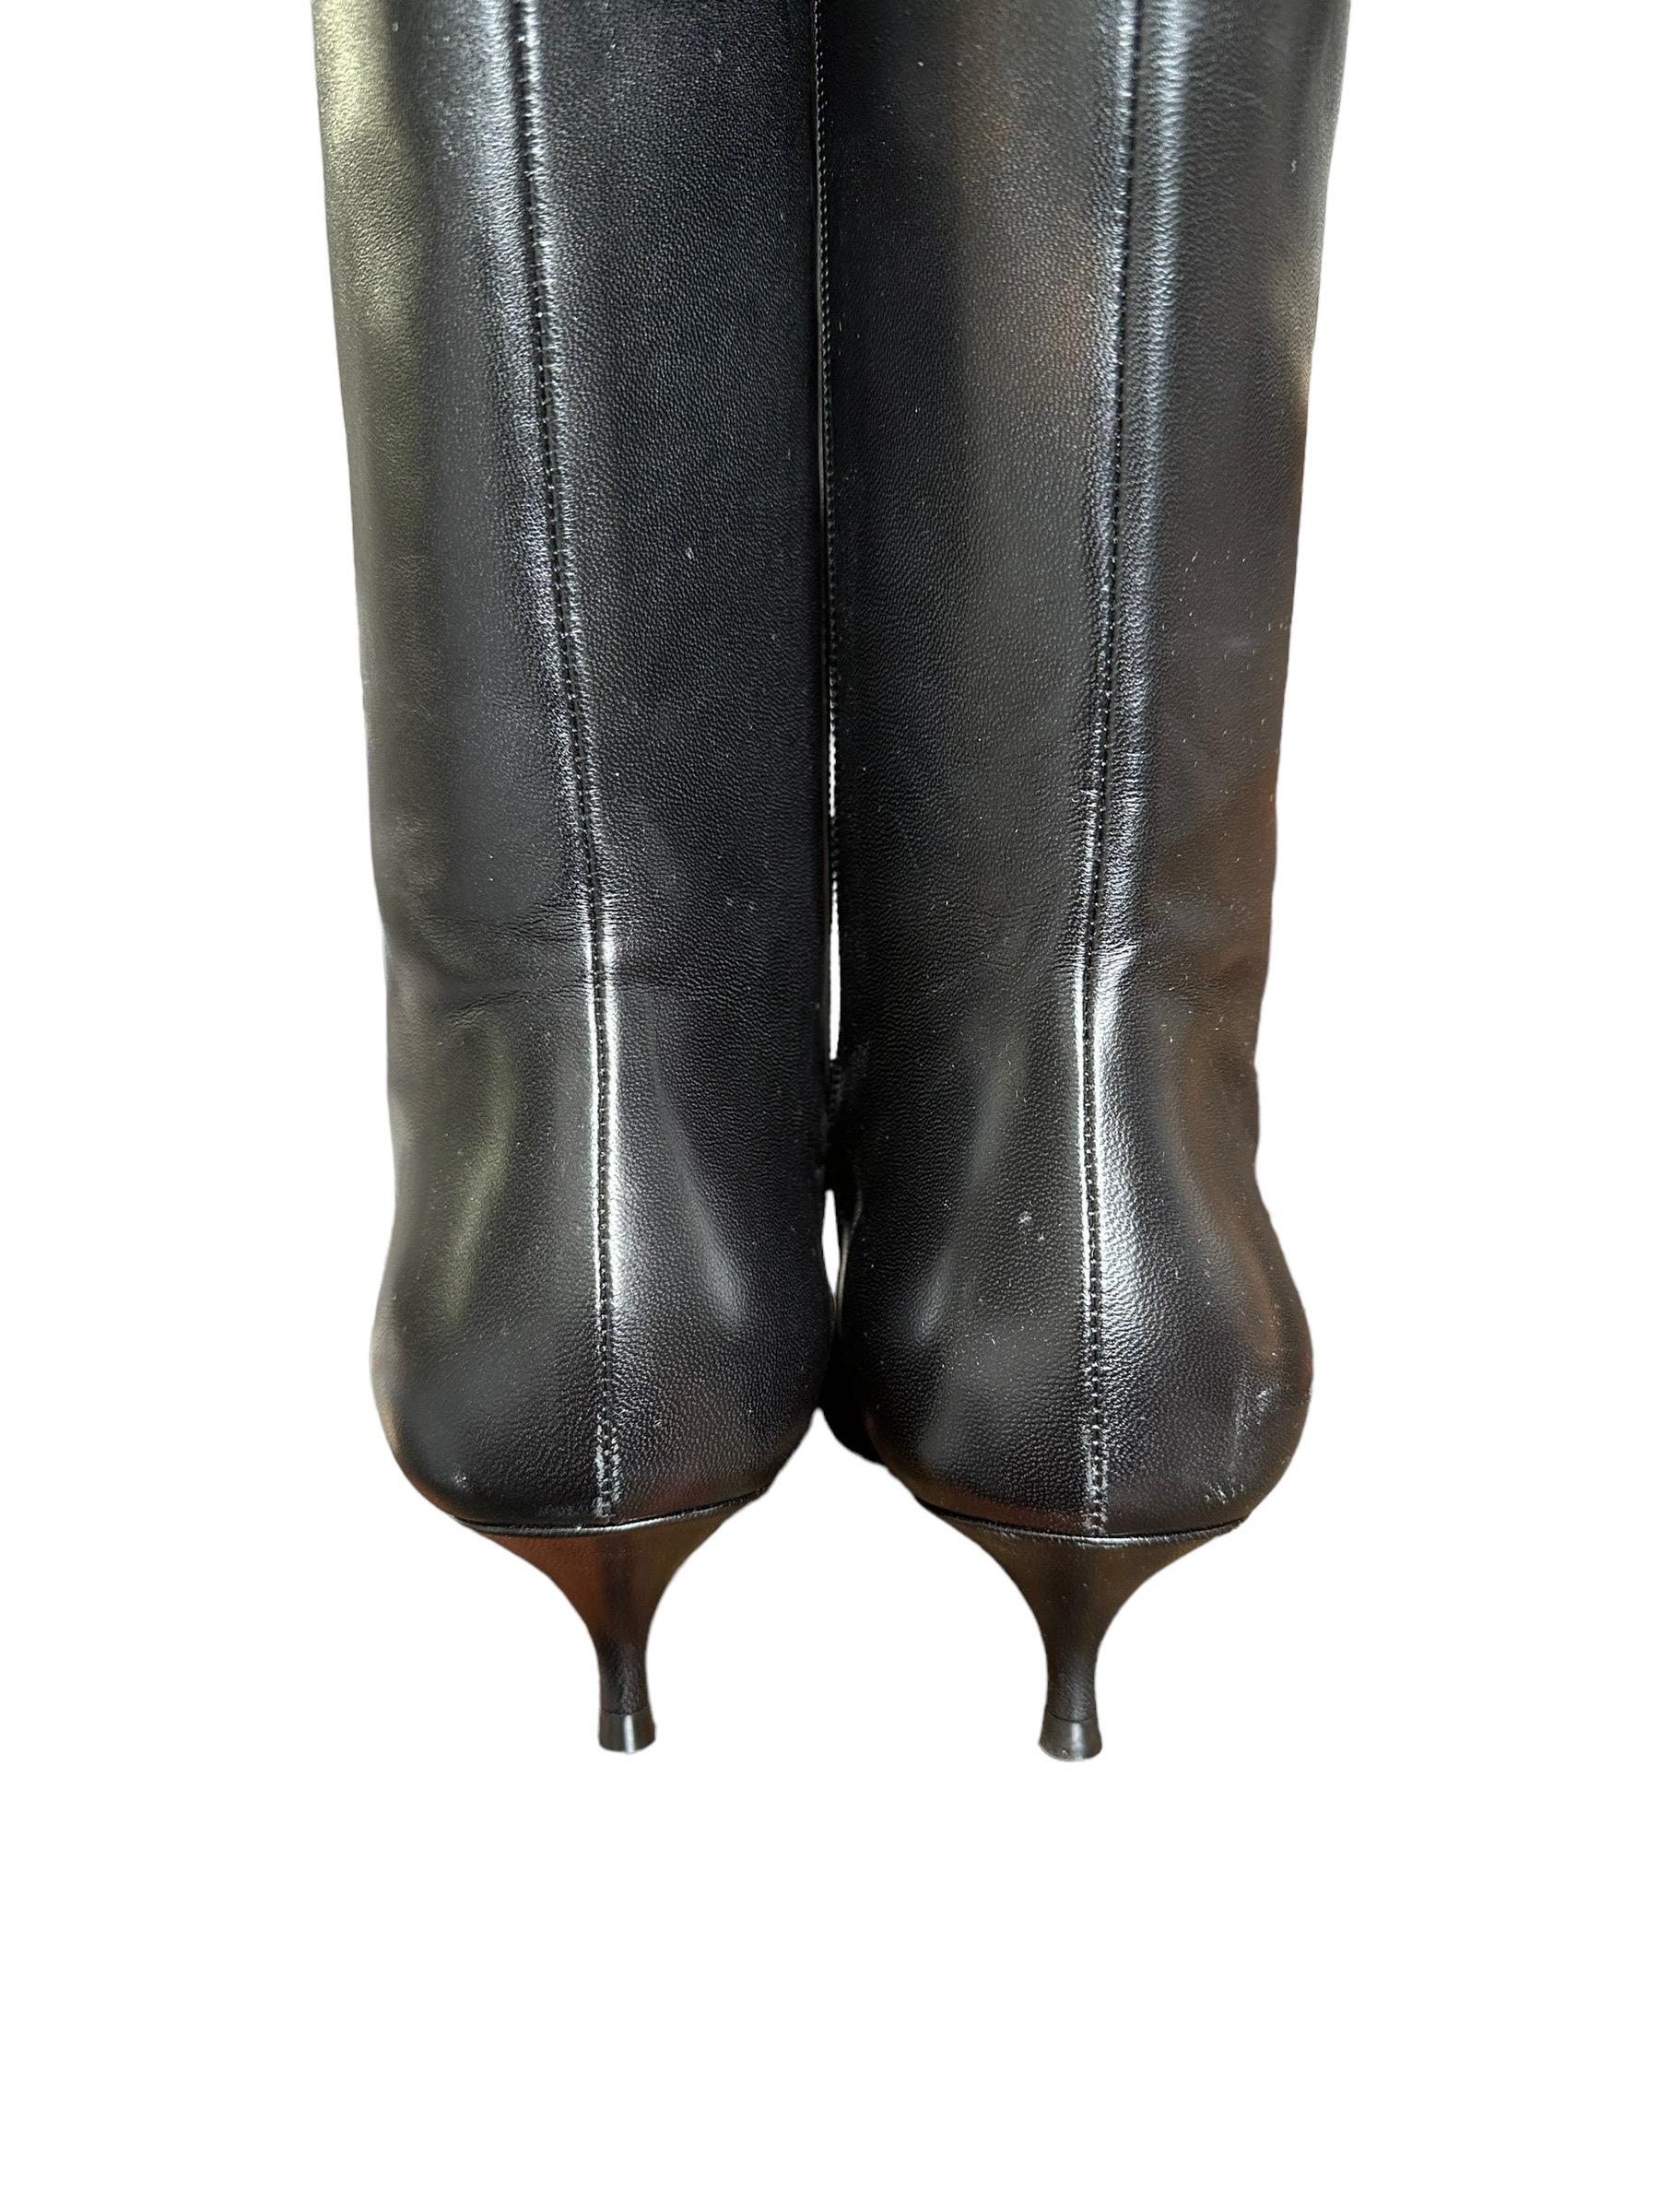 Dior Boots Black Leather Low Heels 6